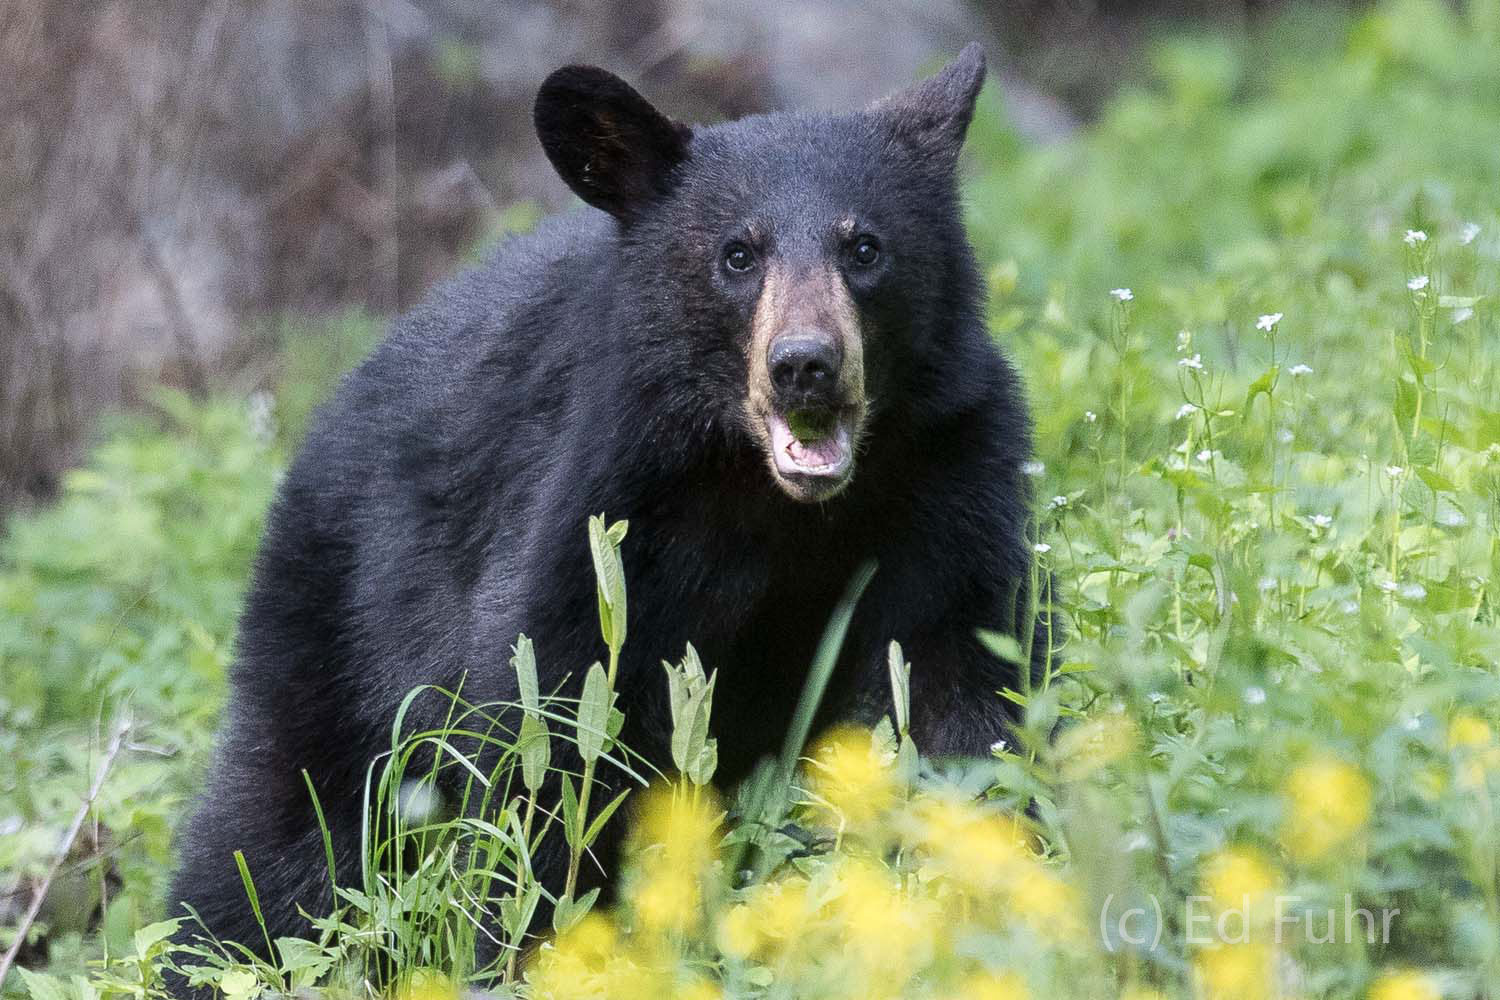 This black bear, the mother of three cubs, is in an unending search for food, grazing here on a buffet of spring wildflowers.